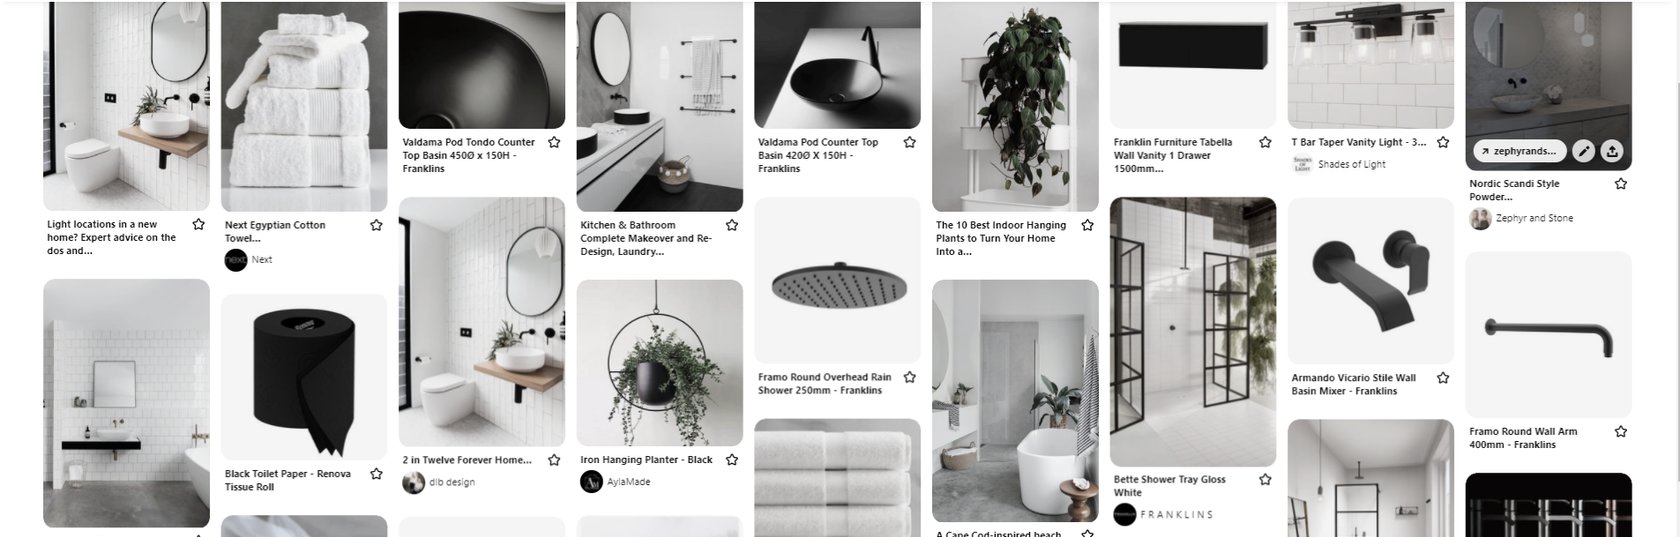 Building your bathroom with mood boards